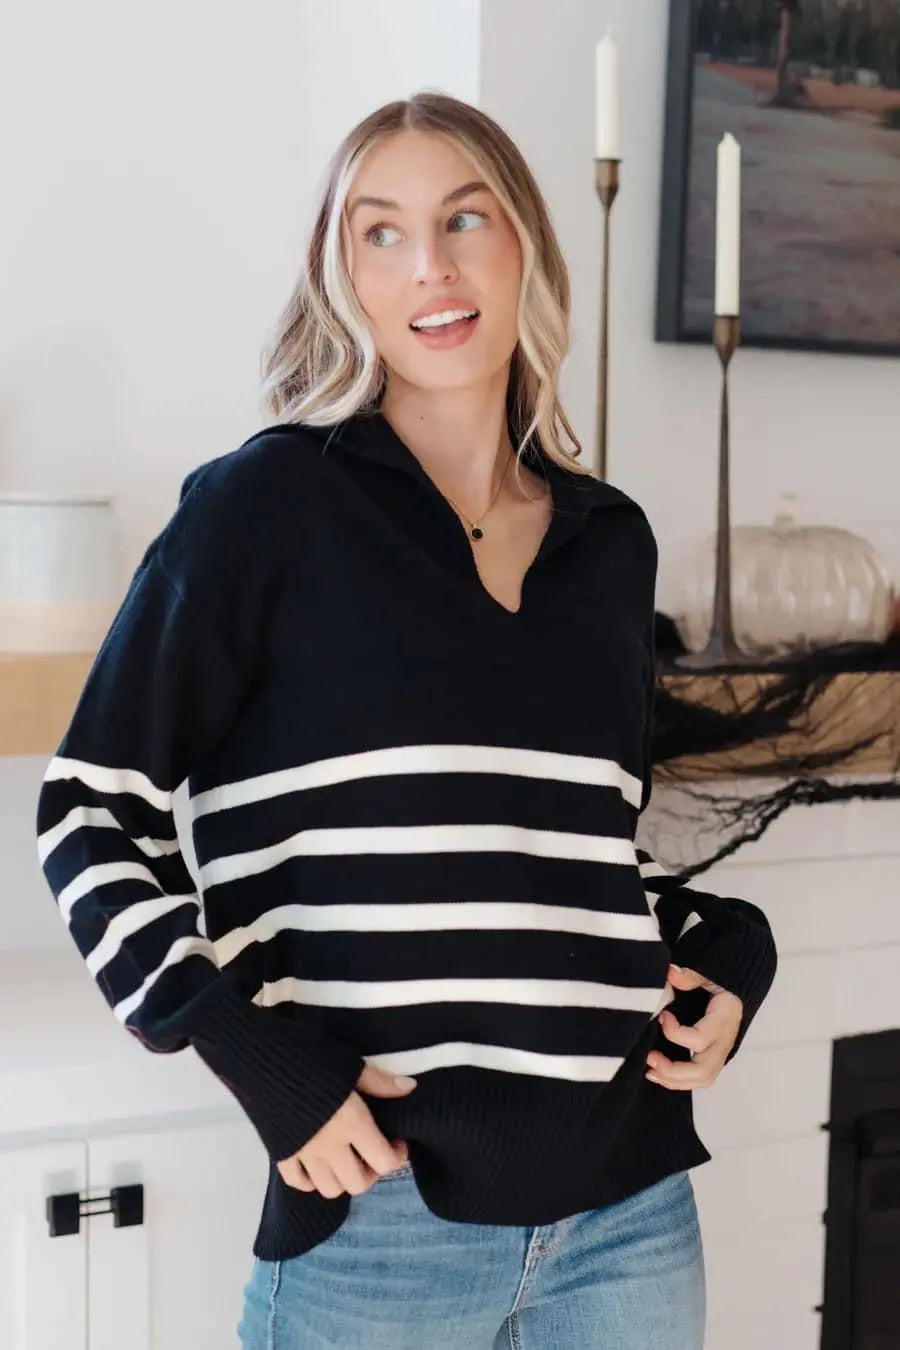 From Here On Out Striped Sweater Styled by Steph